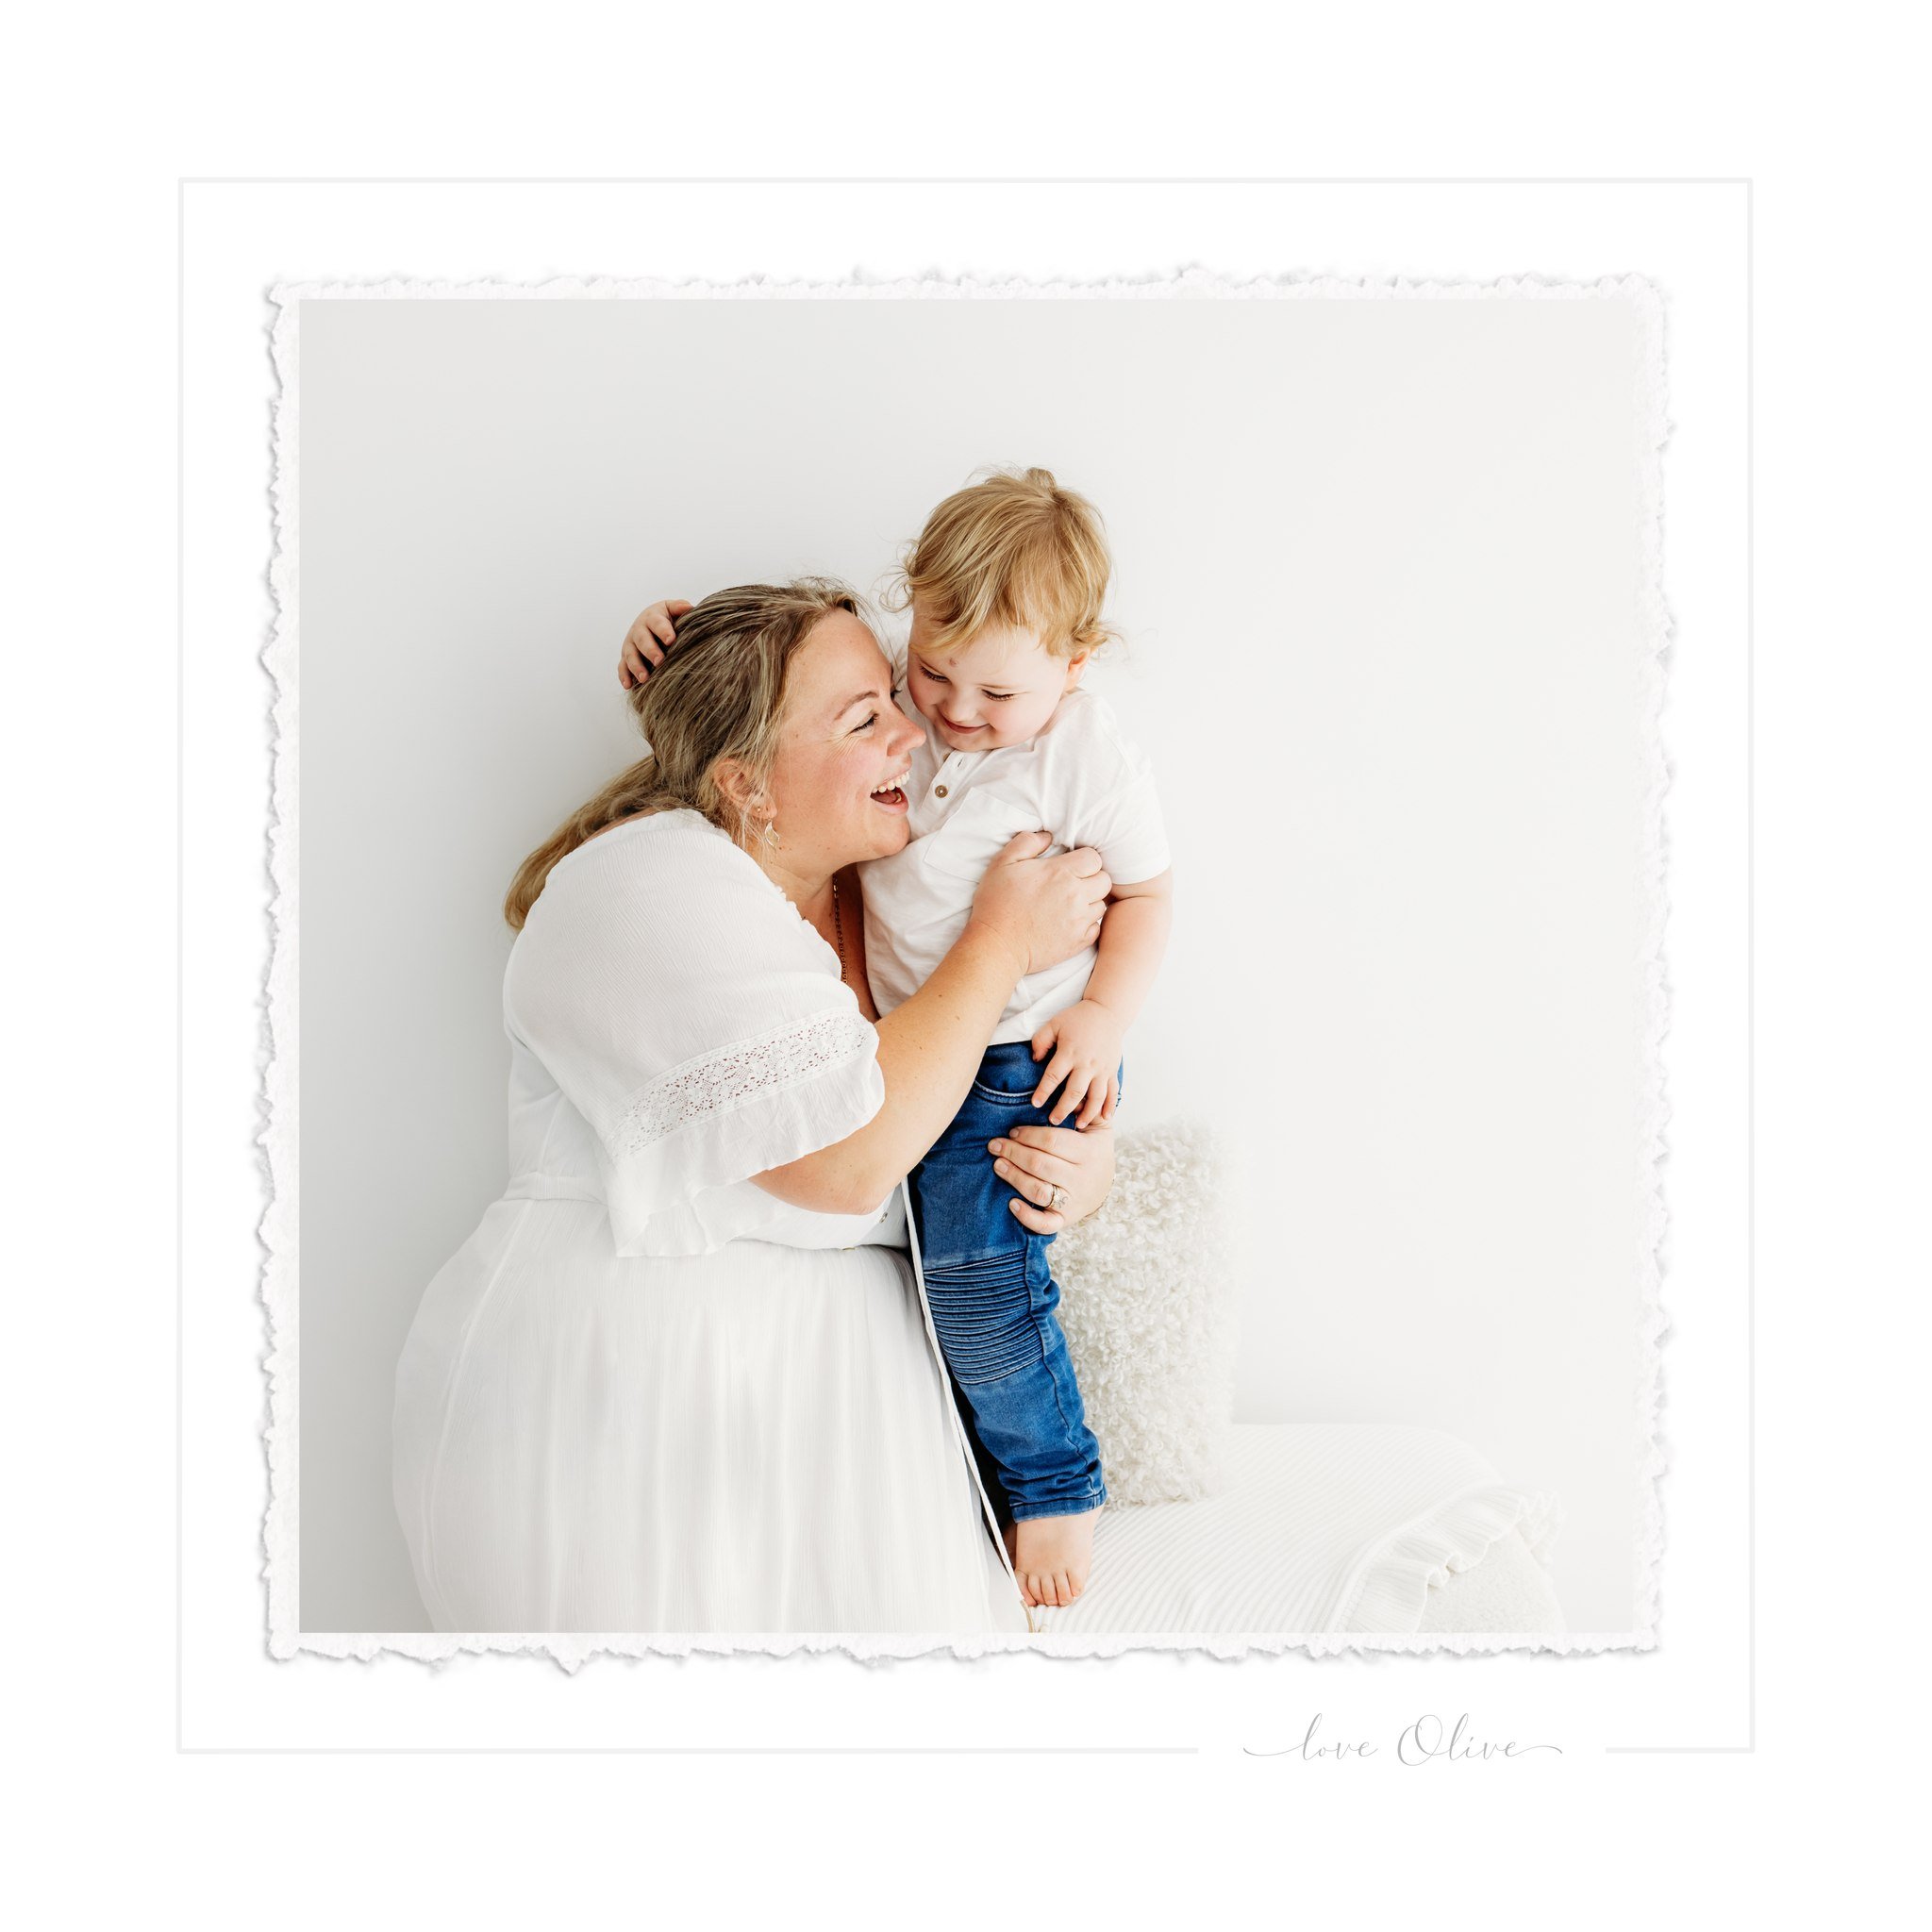 g i g g l e

Today in the studio we had a beautiful Mama + Mini Session and my cheeks hurt from smiling - this little guy had the most cheeky giggle 🤍